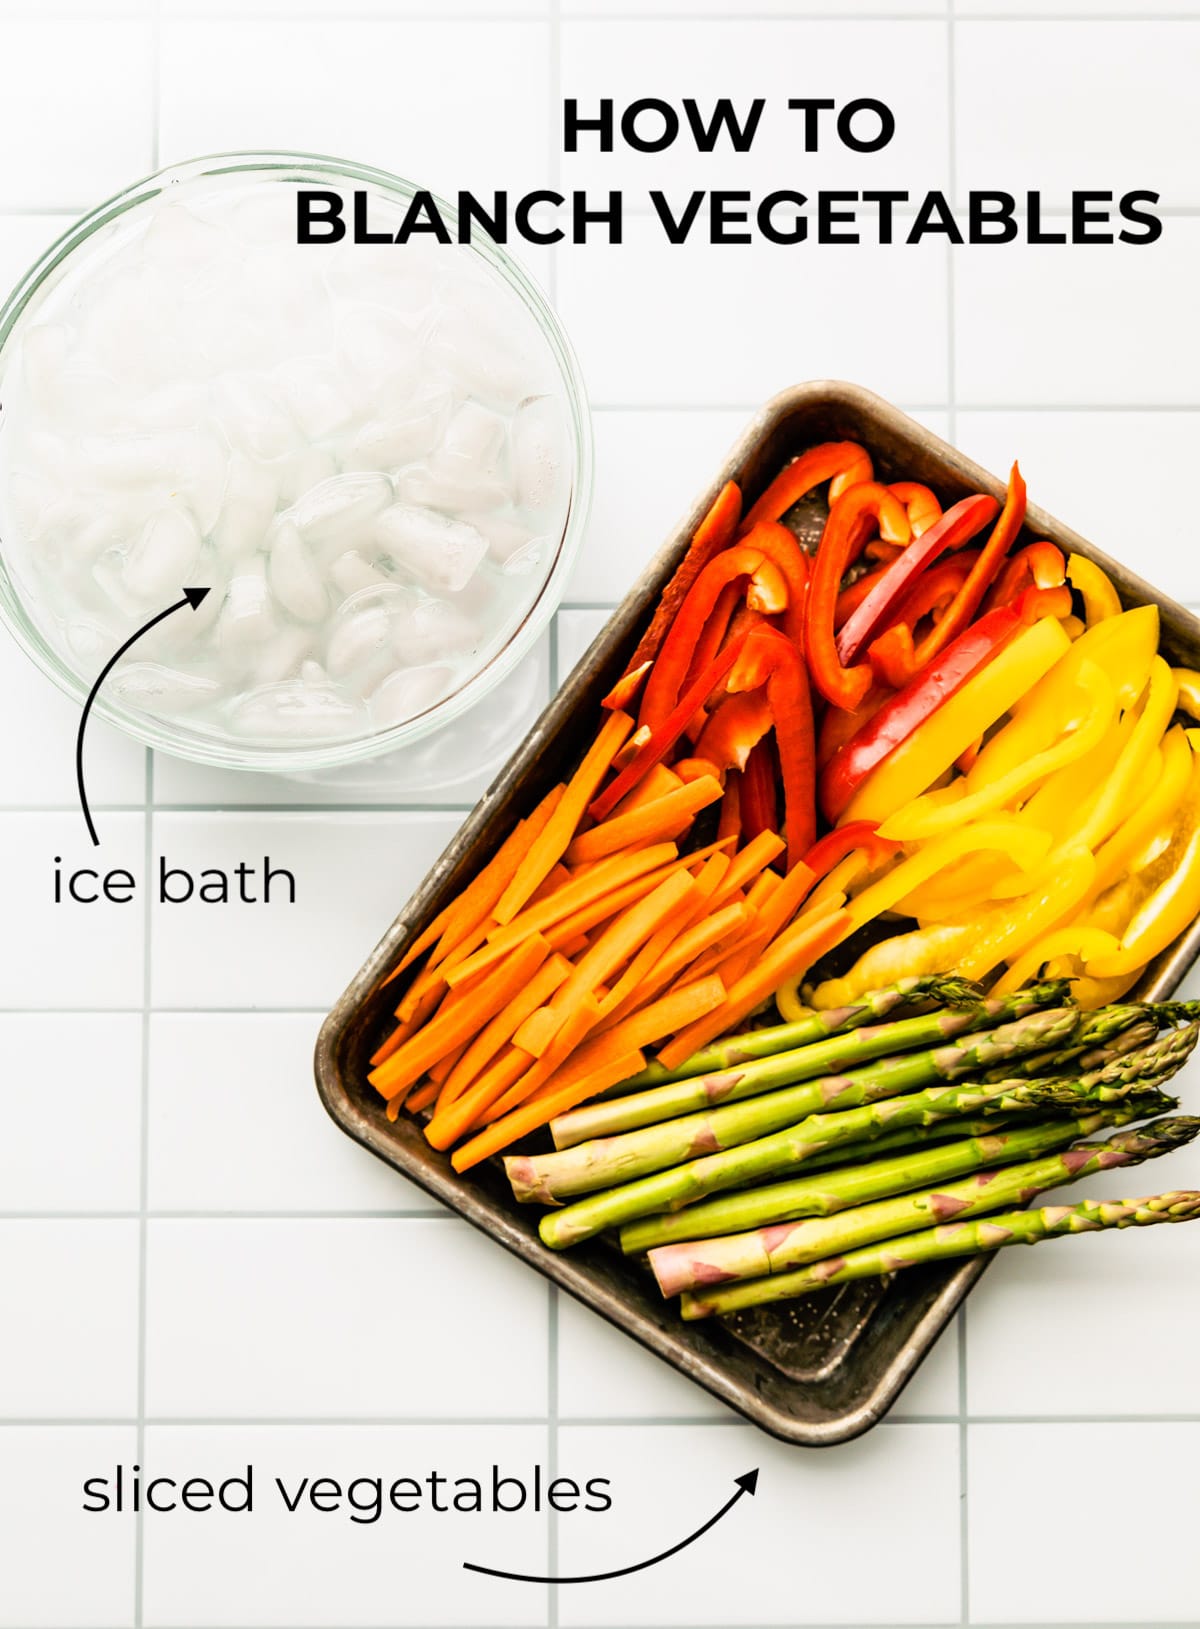 Baking sheet filled with cut carrots, peppers in red and yellow, and cut asparagus. Bowl of ice water next to baking sheet.